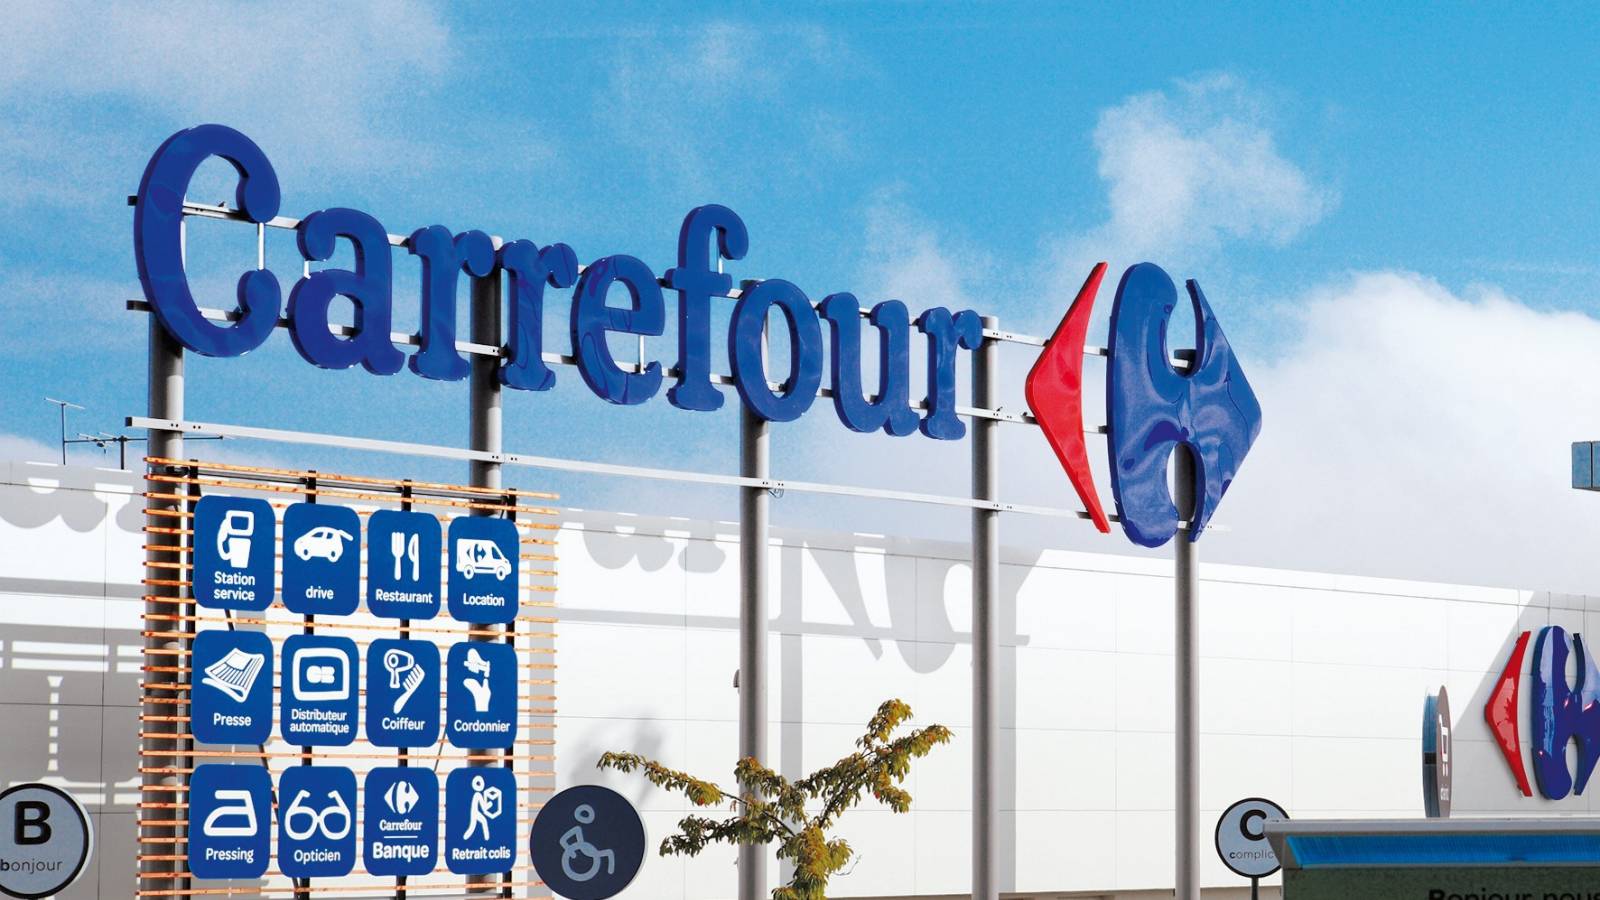 Carrefour electronic